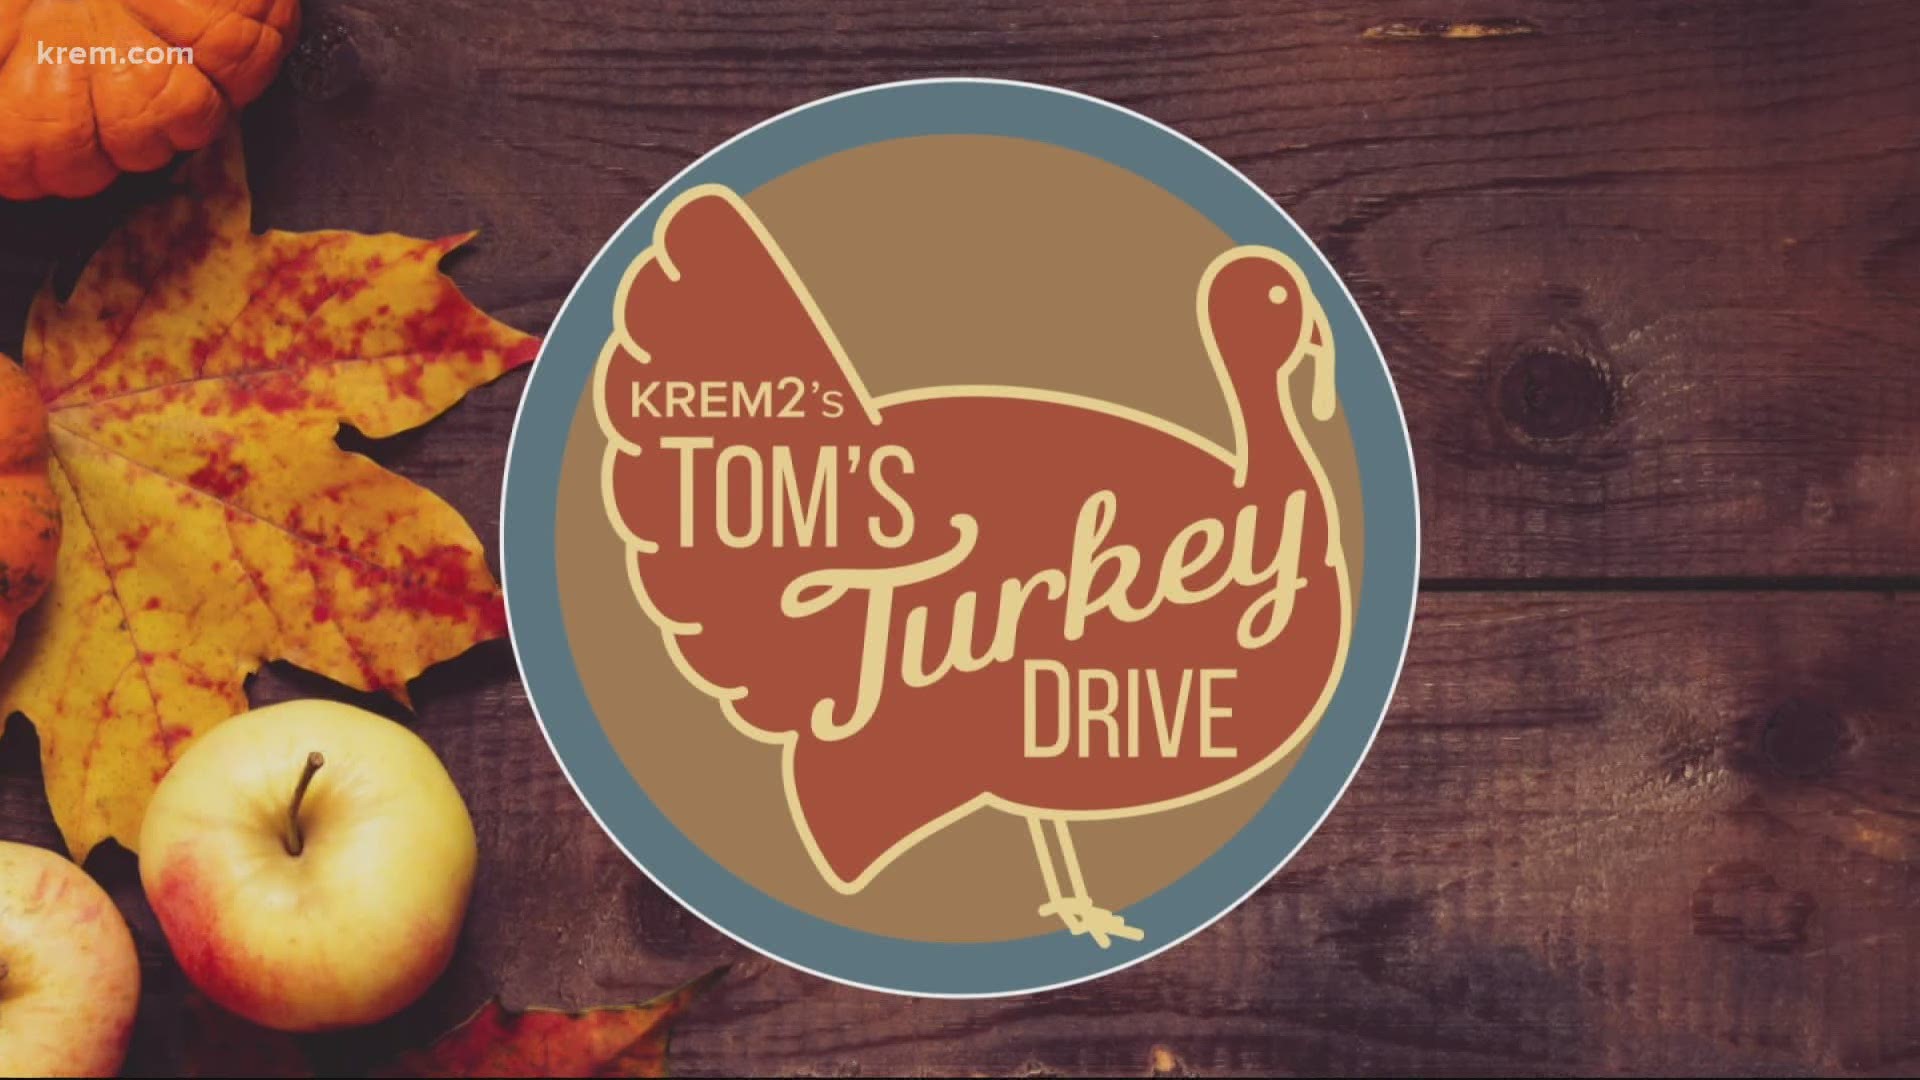 Here's everything you need to know about Tom's Turkey Tuesday this year.